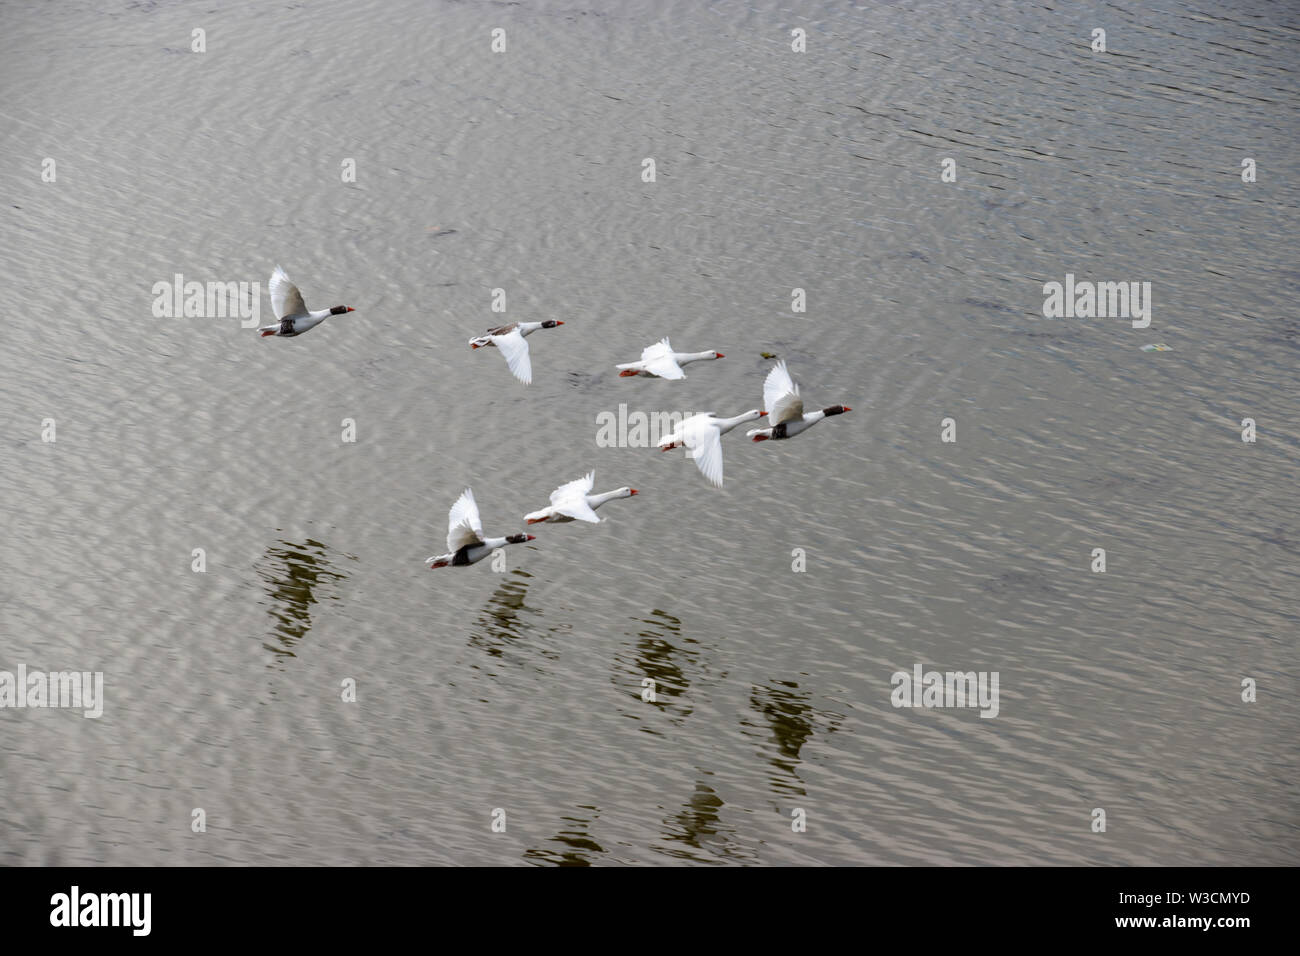 Seven white geese flying in a V formation low over a body of water Stock Photo